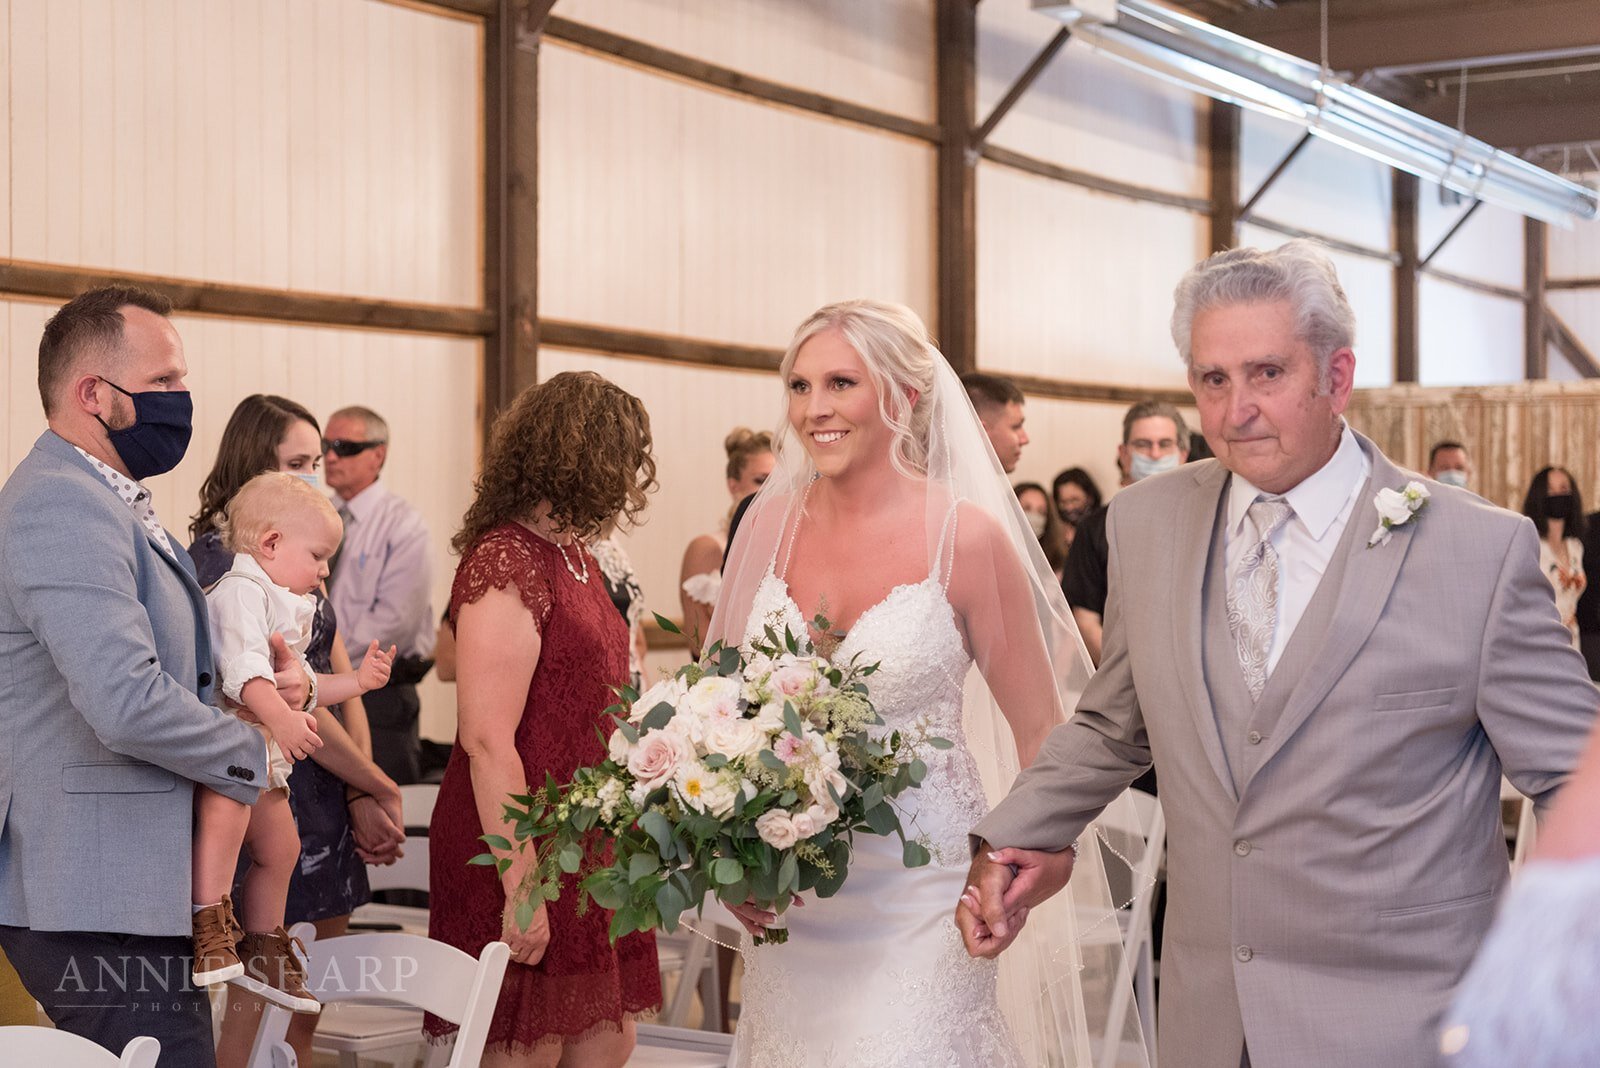 Amber and Doctor Matthew's intimate Wedding at Melhorn Manor